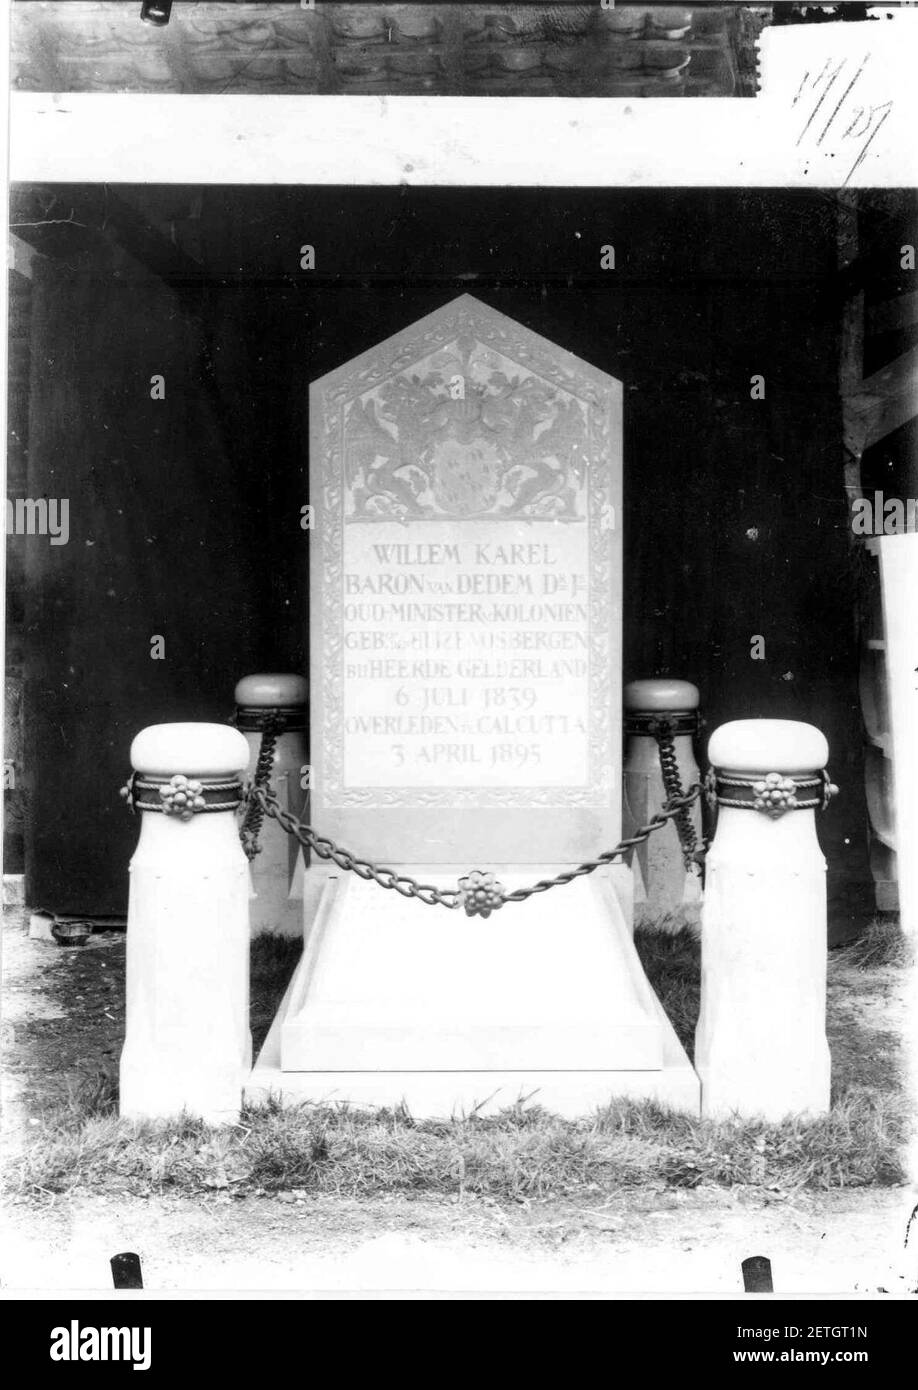 Photograph of the grave monument of Willem Karel van Dedem Cuypershuis 0686 (025). Stock Photo